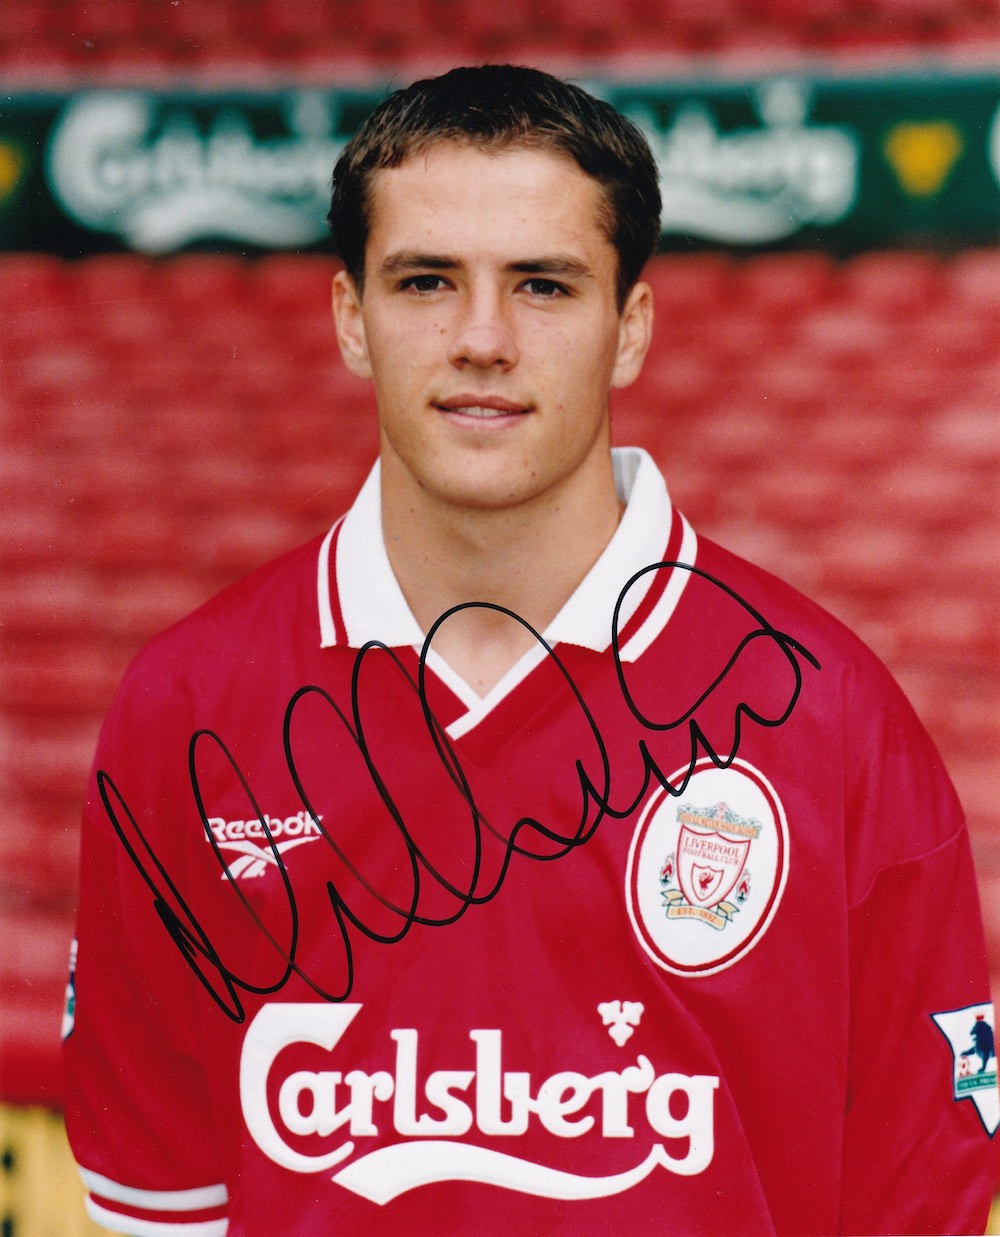 Michael Owen Former Liverpool Footballer 10x8 inch Signed Photo. Good Condition. All autographs come